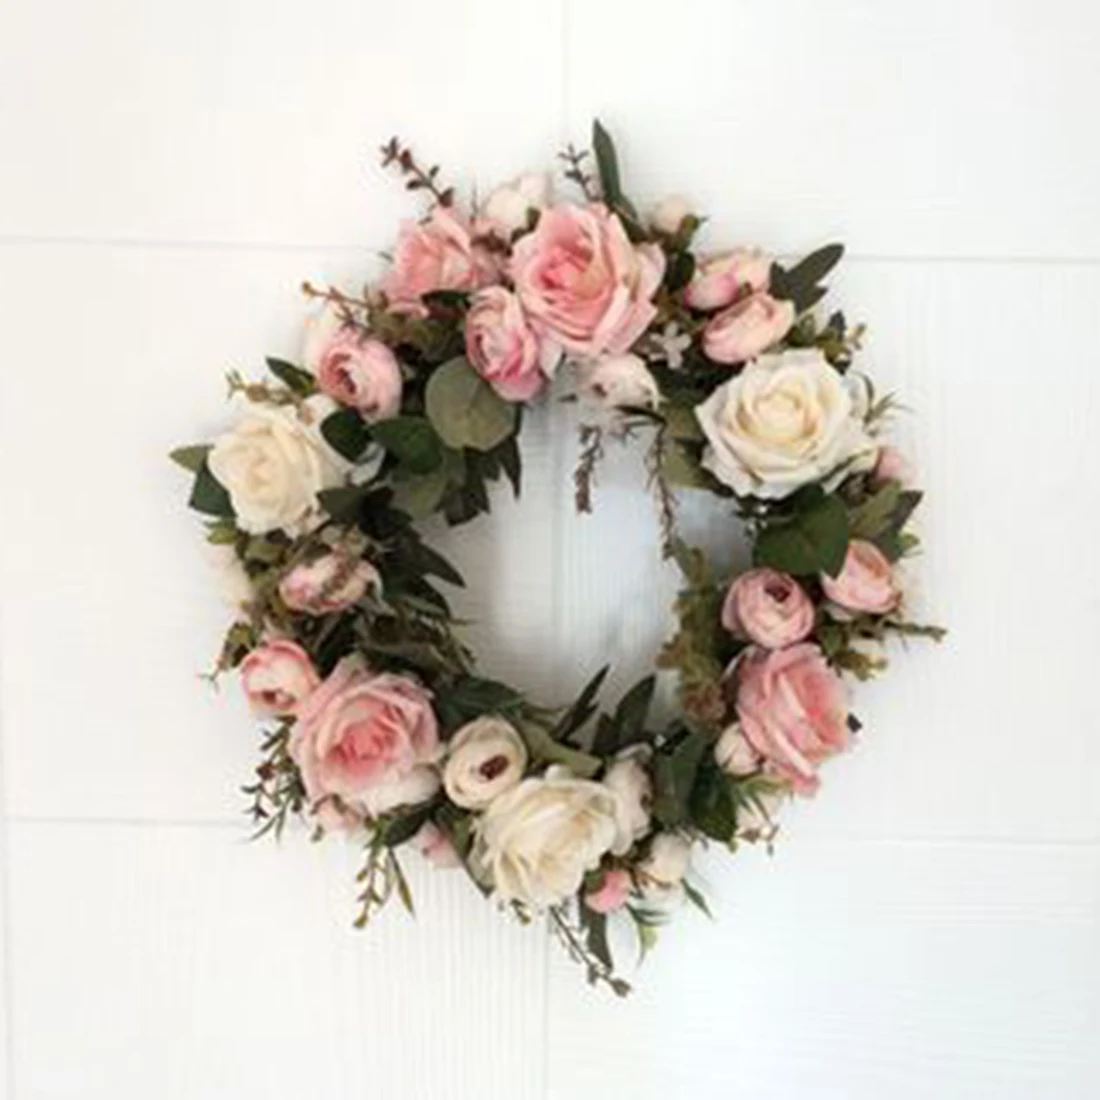 Silk Artificial Flowers Wreaths Artificial Garland For Wedding Decoration Door Home Party Decor Perfect Quality